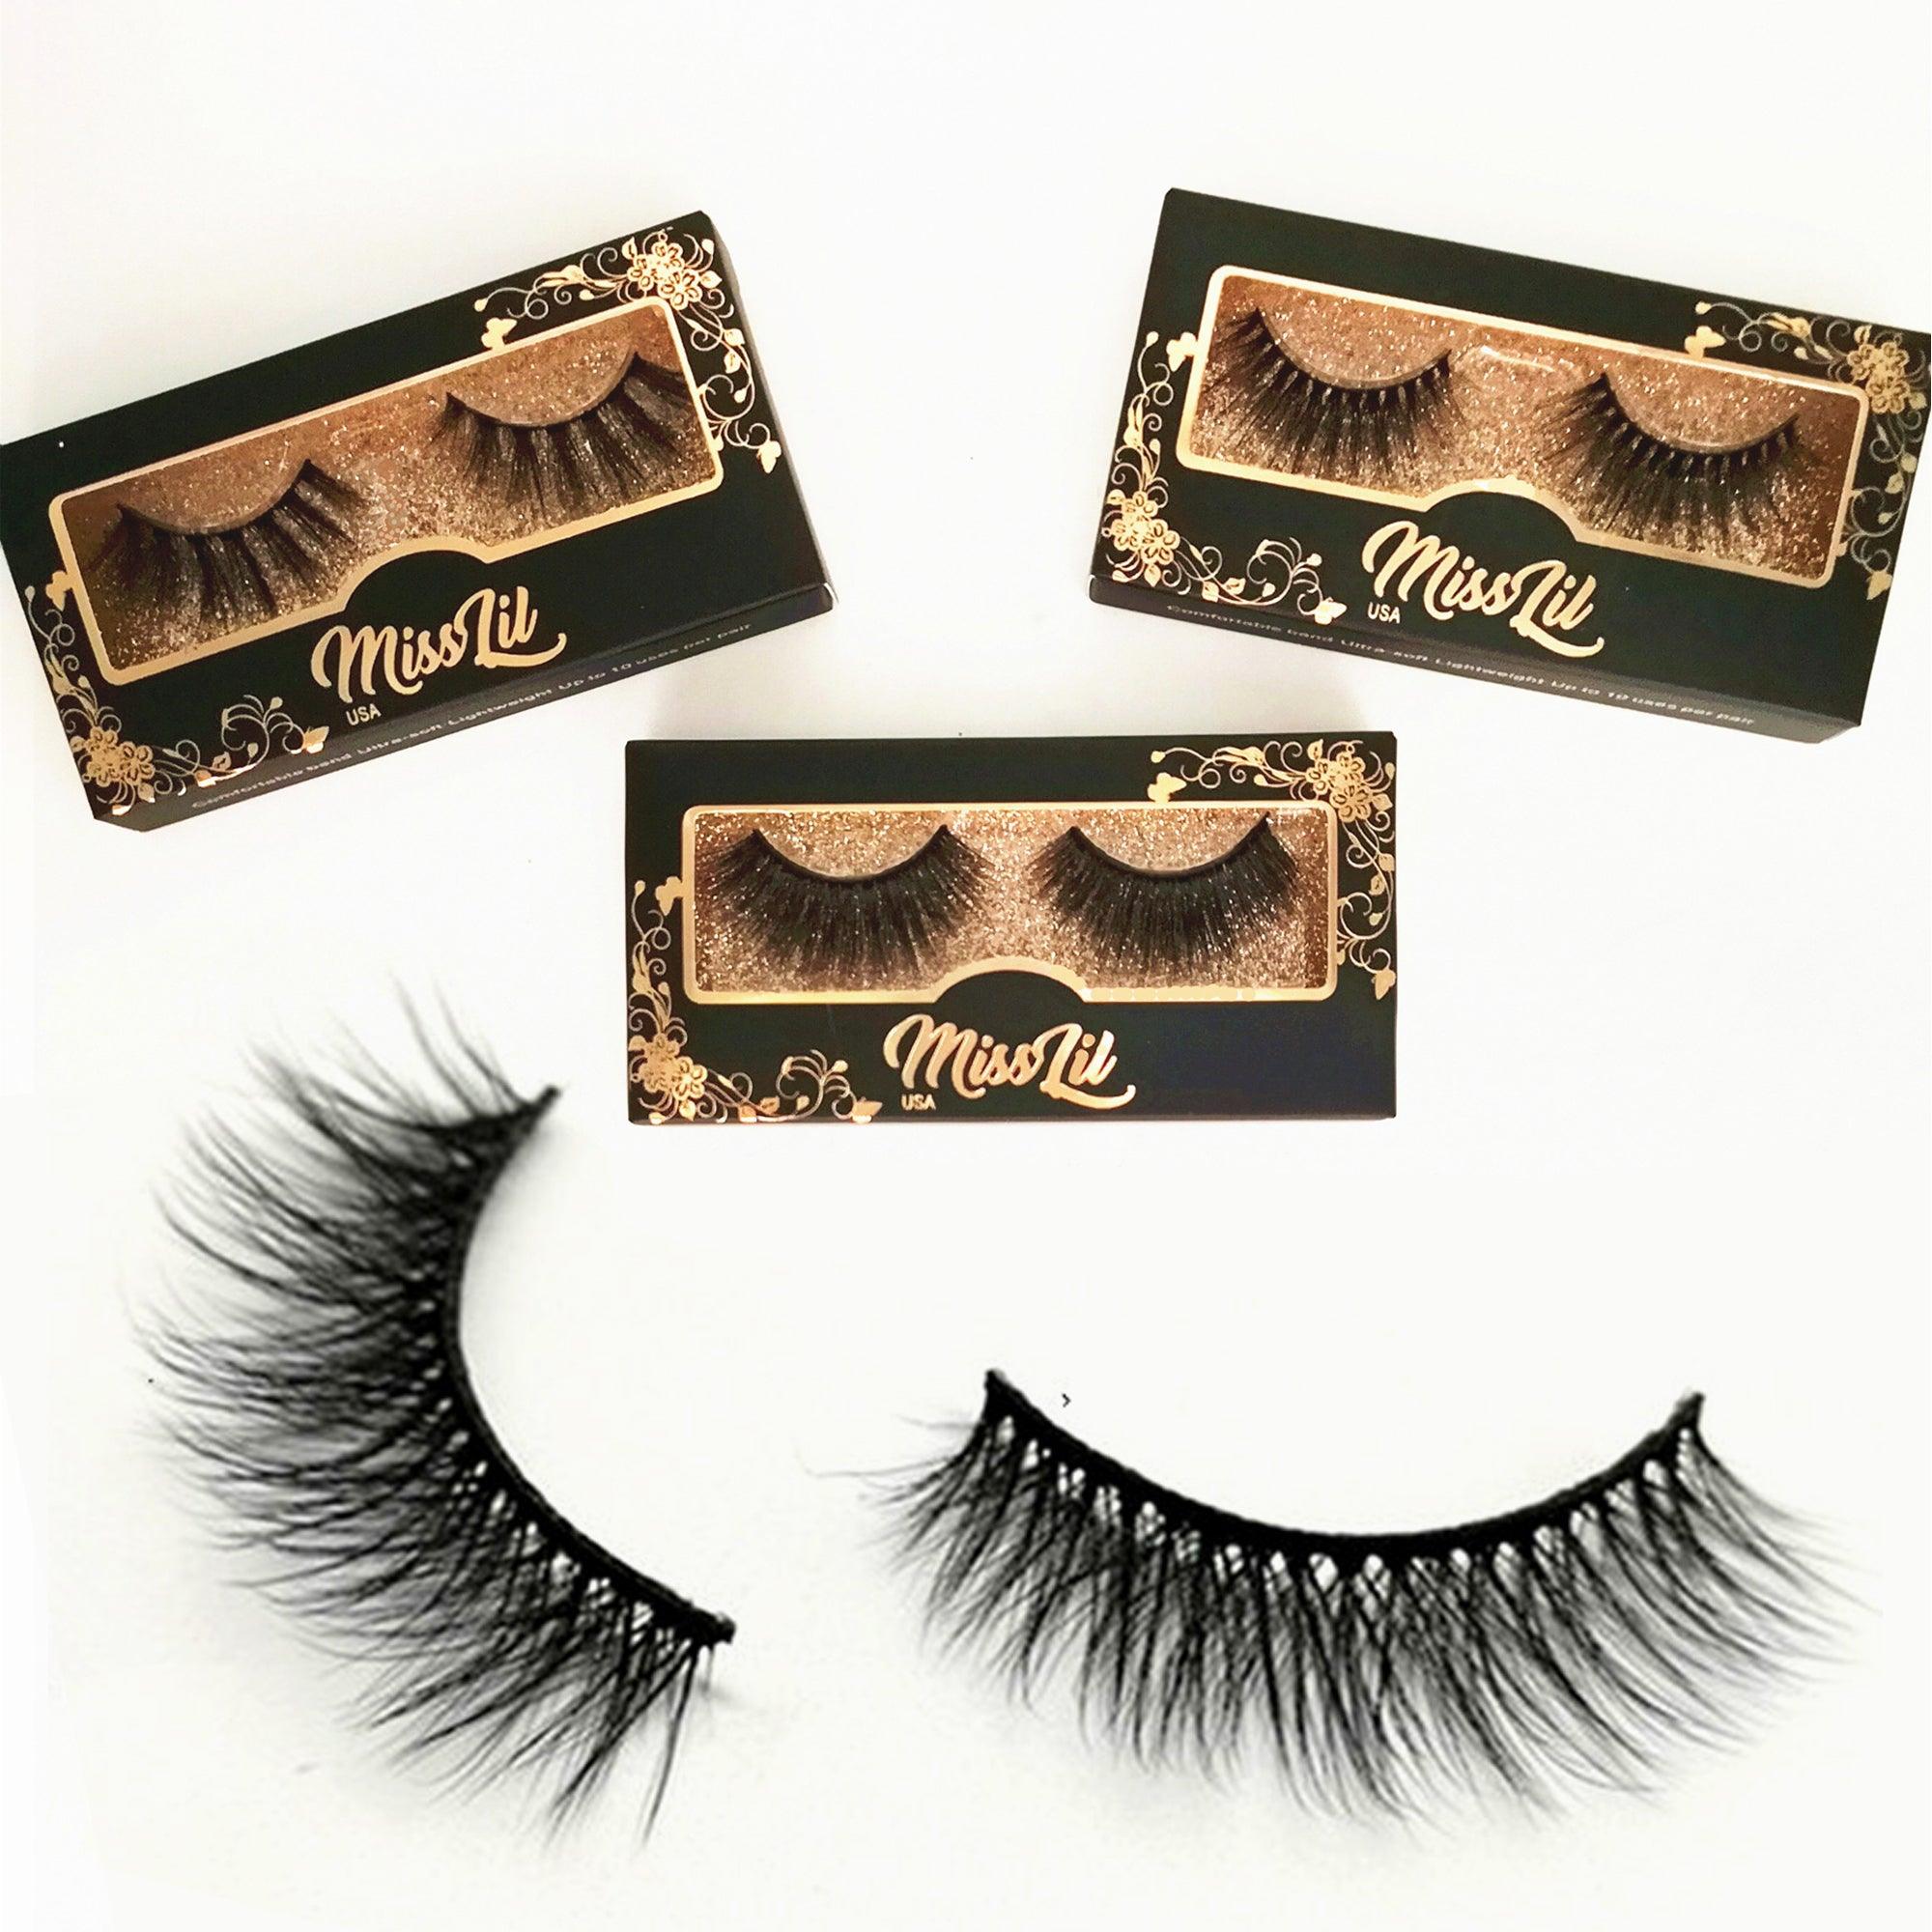 1-Pair Miss Lil USA Lashes #22 (Pack of 12) - Miss Lil USA Wholesale